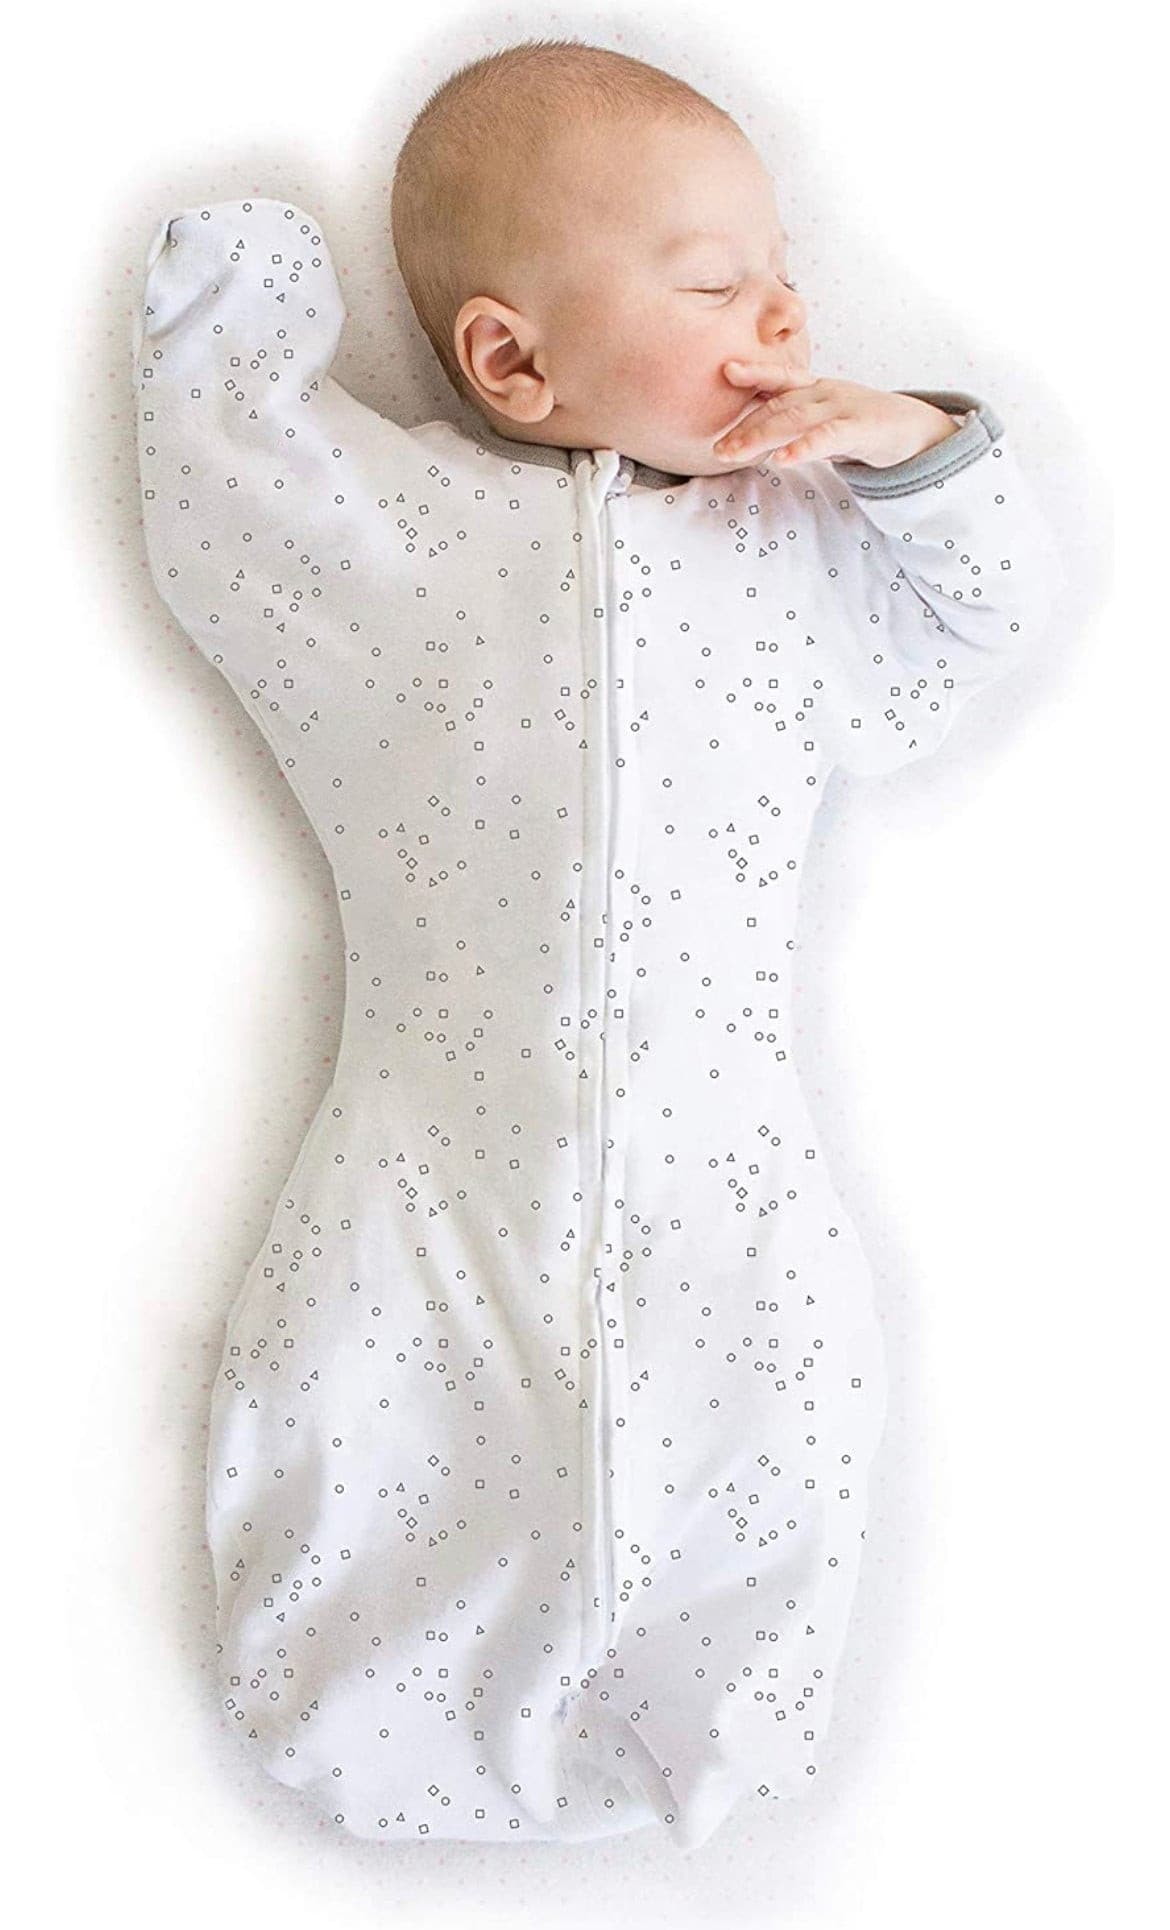 Swaddle Sack with Arms Up Half-Length by Amazing Baby.